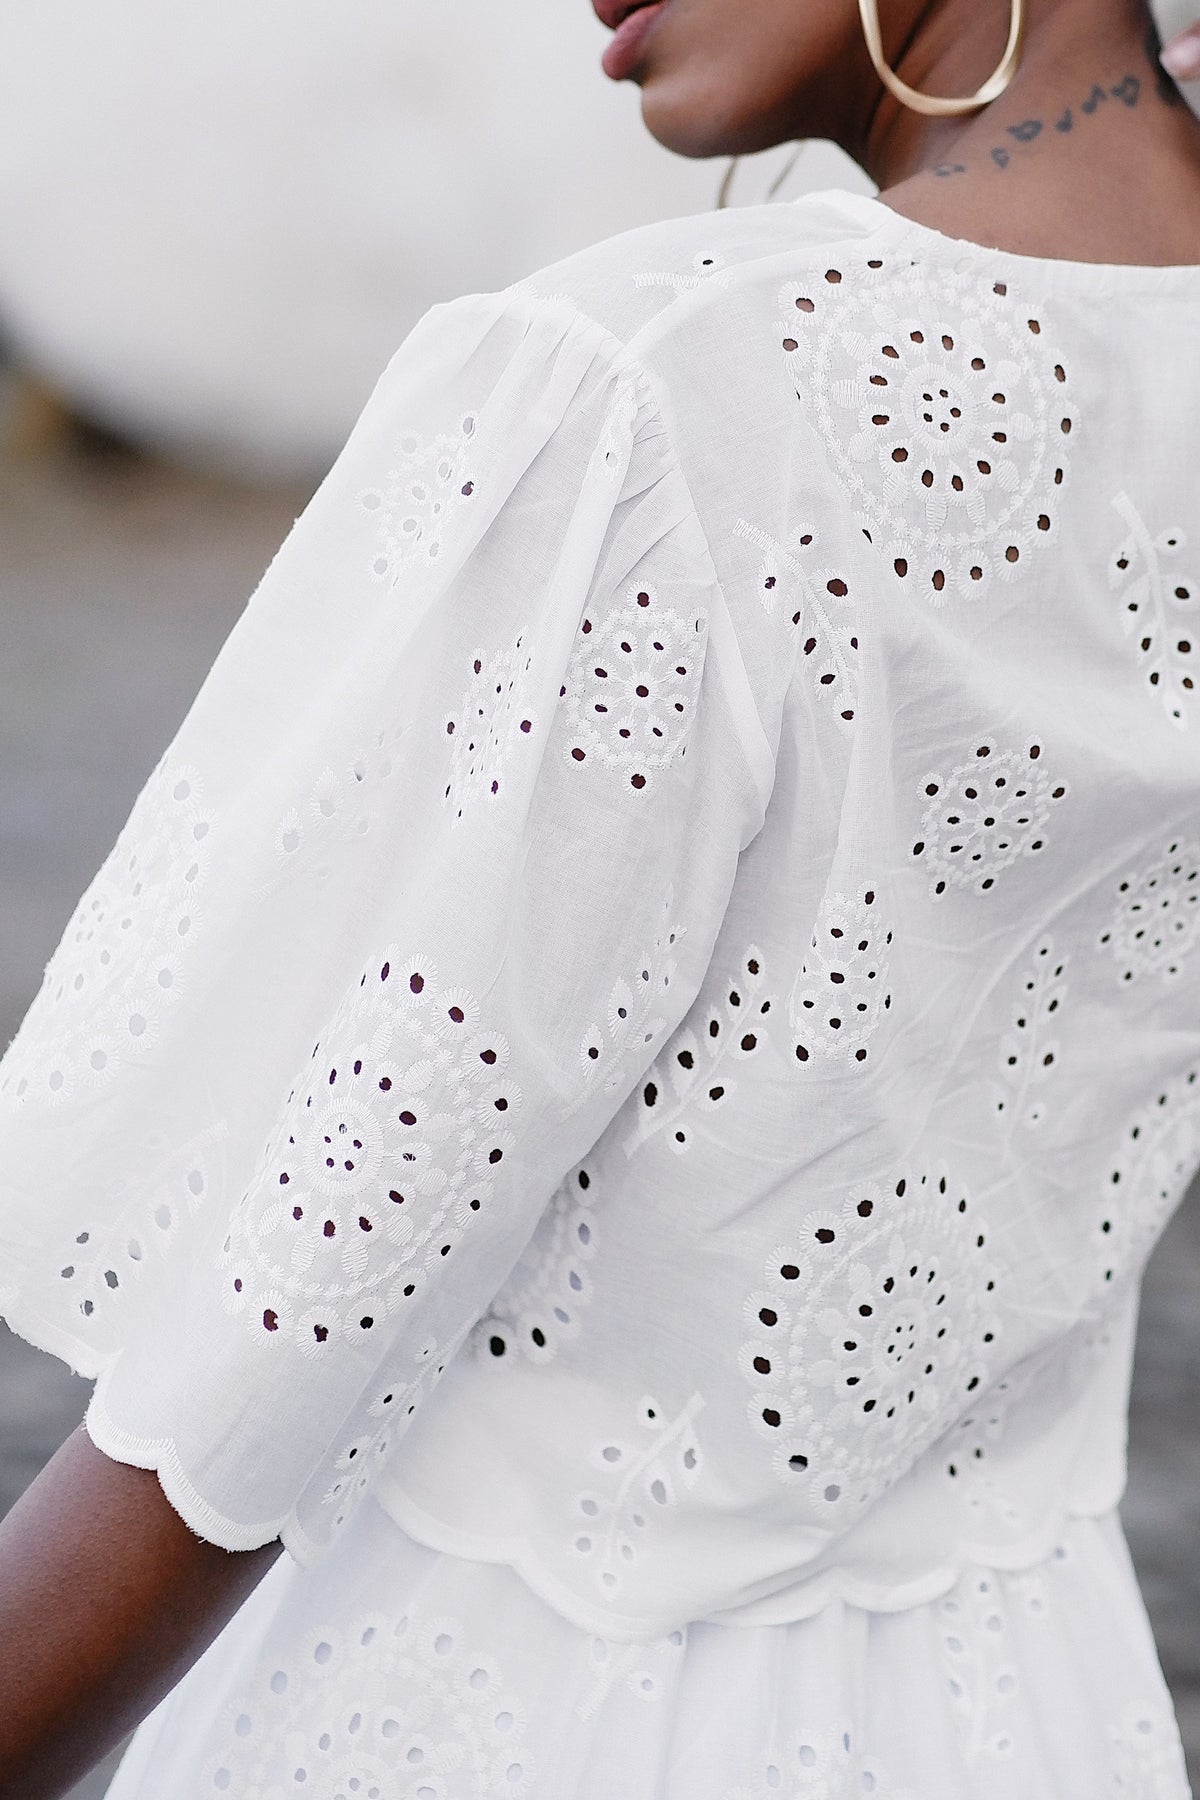 BLOUSE BLANC AVEC BRODERIE ANGLAISE